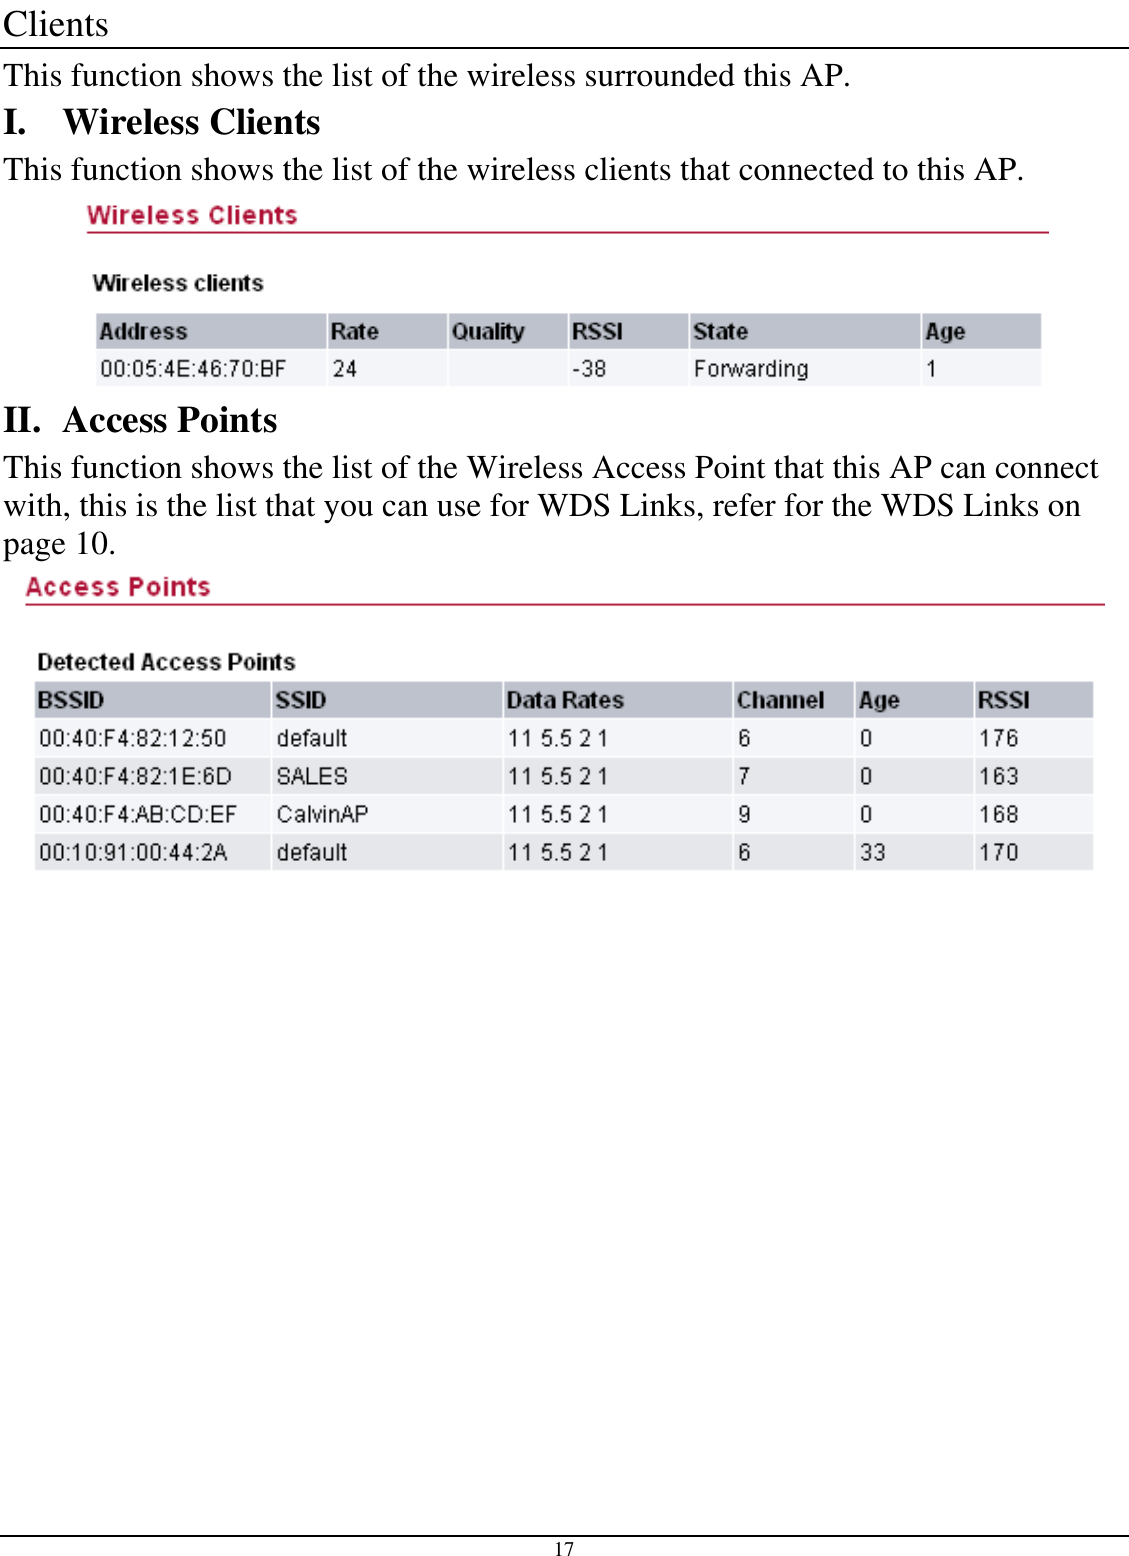  17 Clients This function shows the list of the wireless surrounded this AP. I. Wireless Clients This function shows the list of the wireless clients that connected to this AP.  II. Access Points This function shows the list of the Wireless Access Point that this AP can connect with, this is the list that you can use for WDS Links, refer for the WDS Links on page 10.  